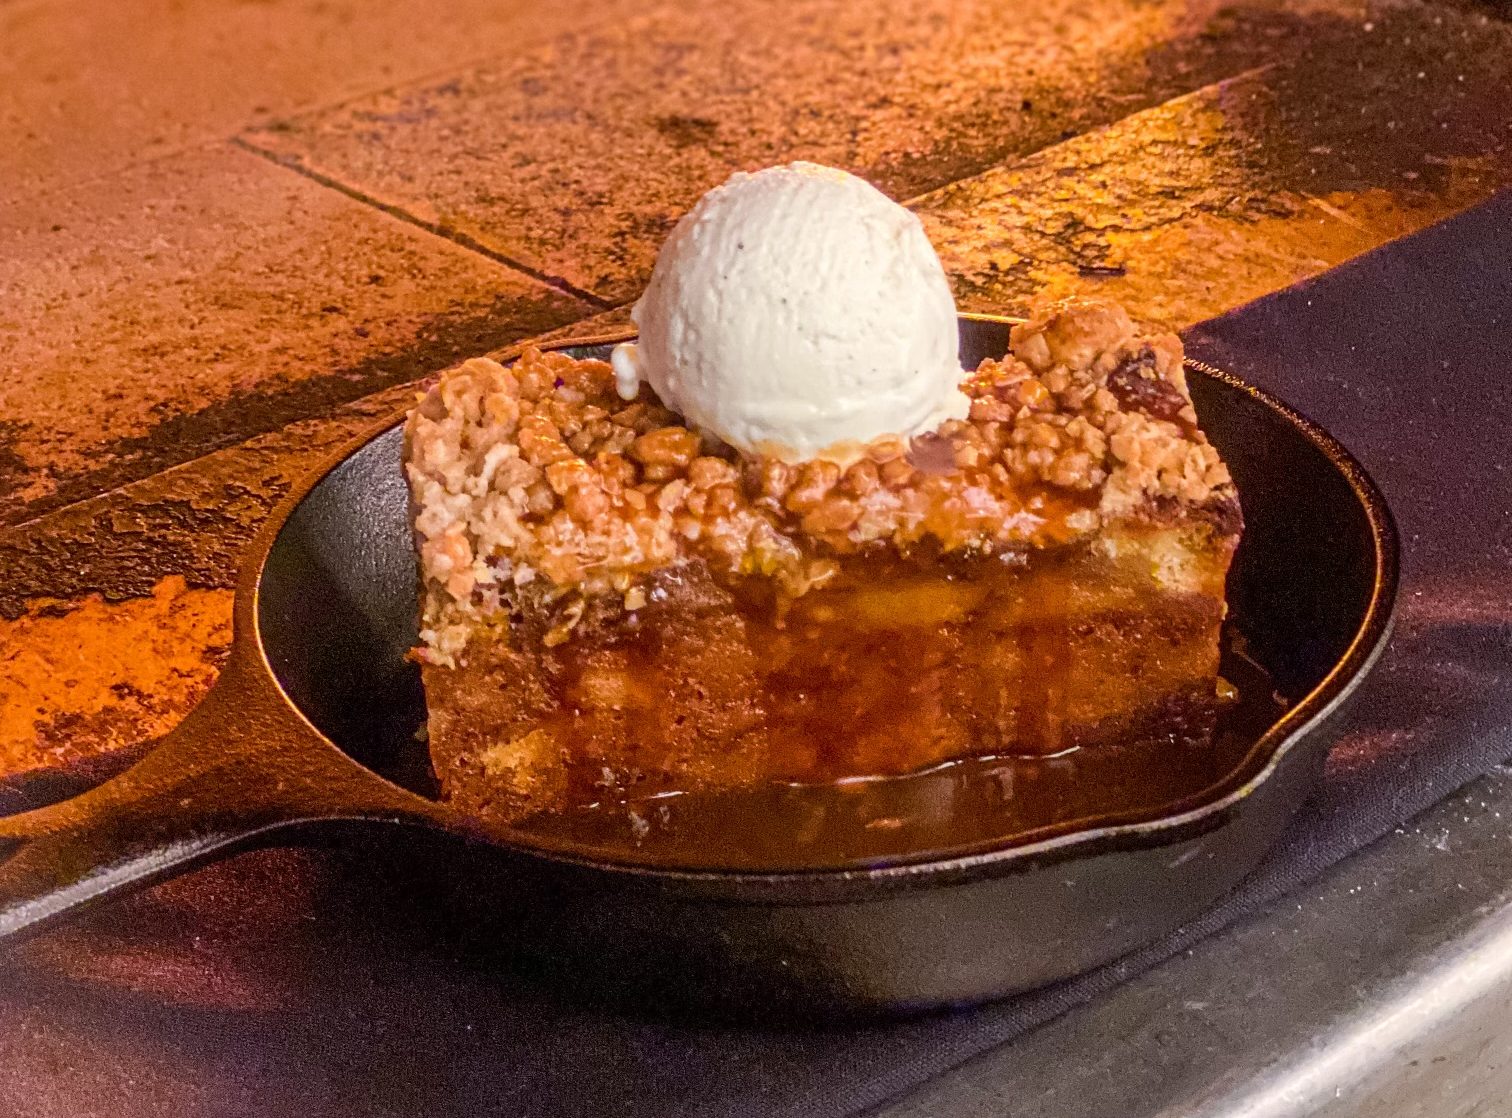 Hawaiian Sweet Roll Bread Pudding with an Oat Streusel Topping
